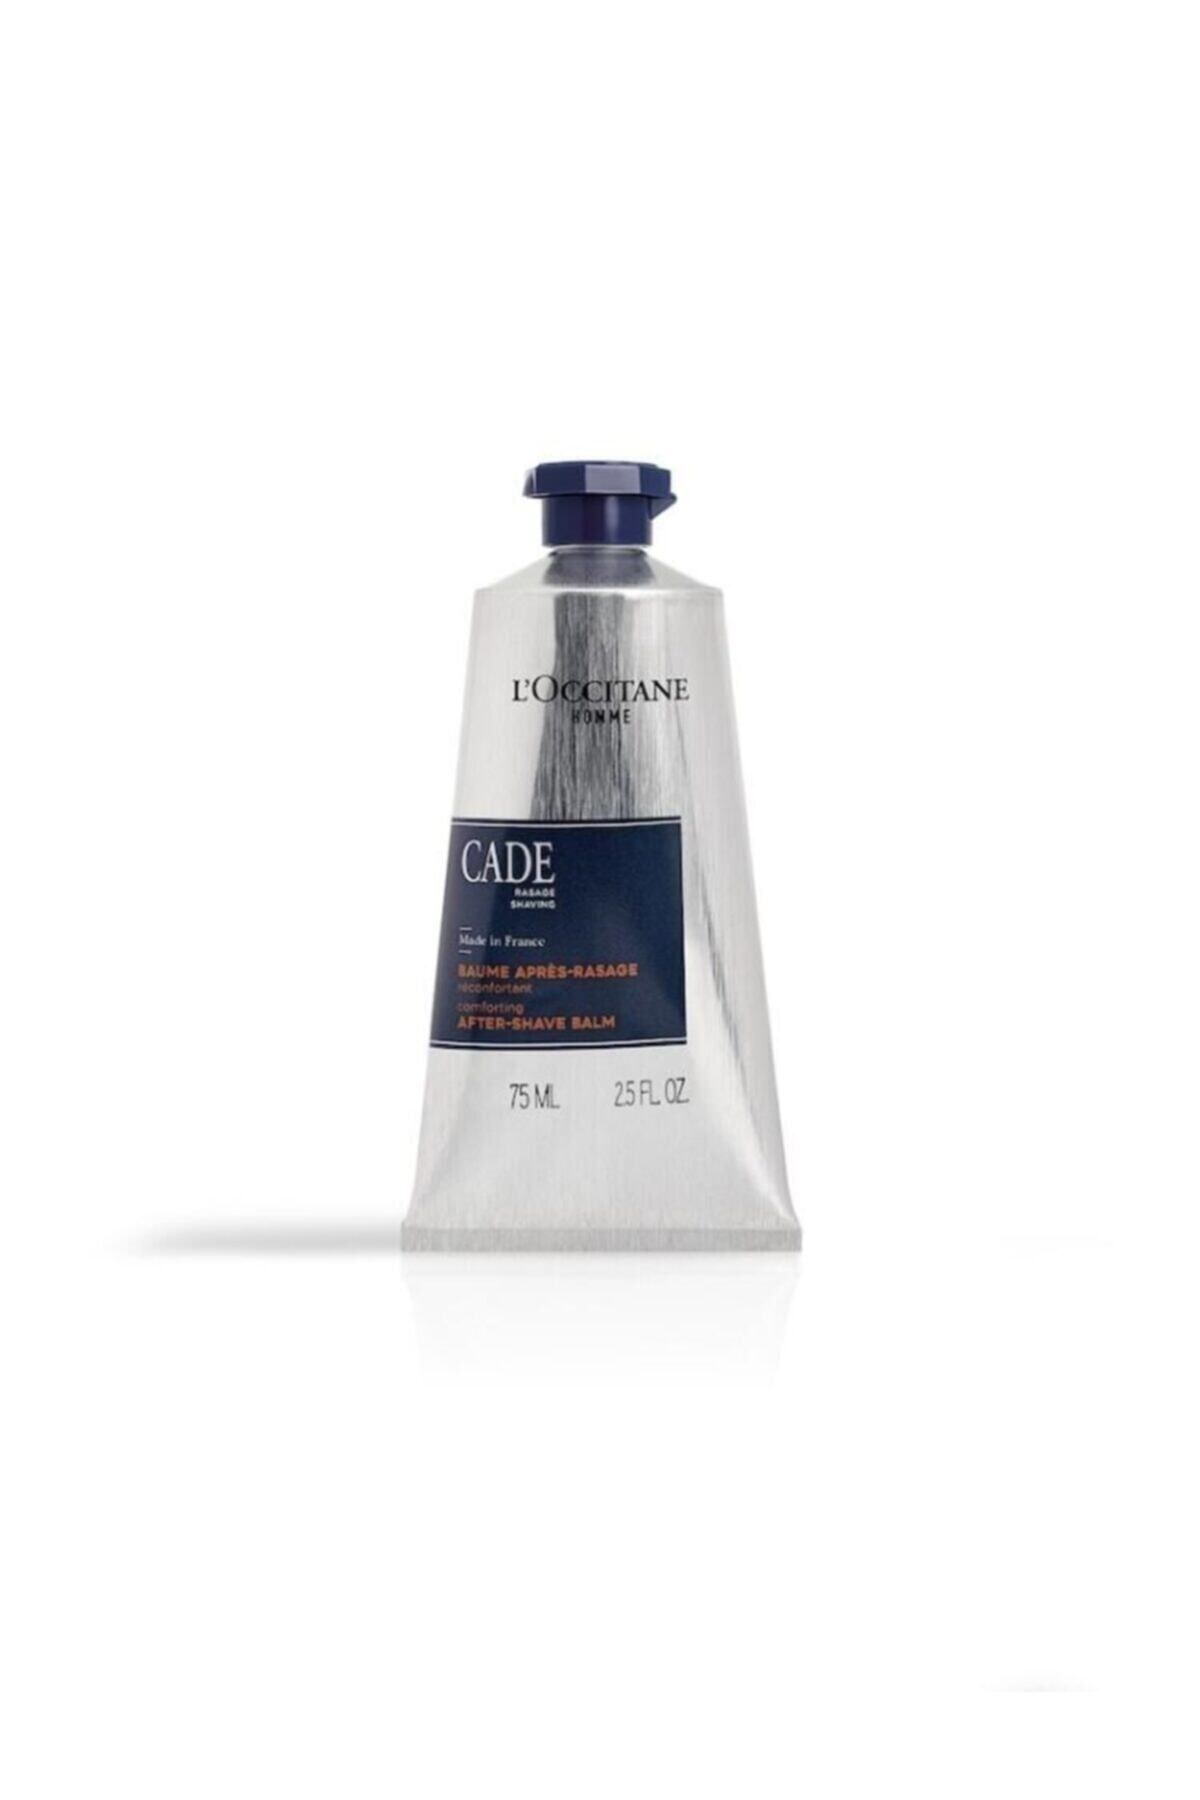 L'Occitane CADE AFTER SHAVE BALM - CADE AFTER SHAVE CREAM - 75 ML DEMBA3010